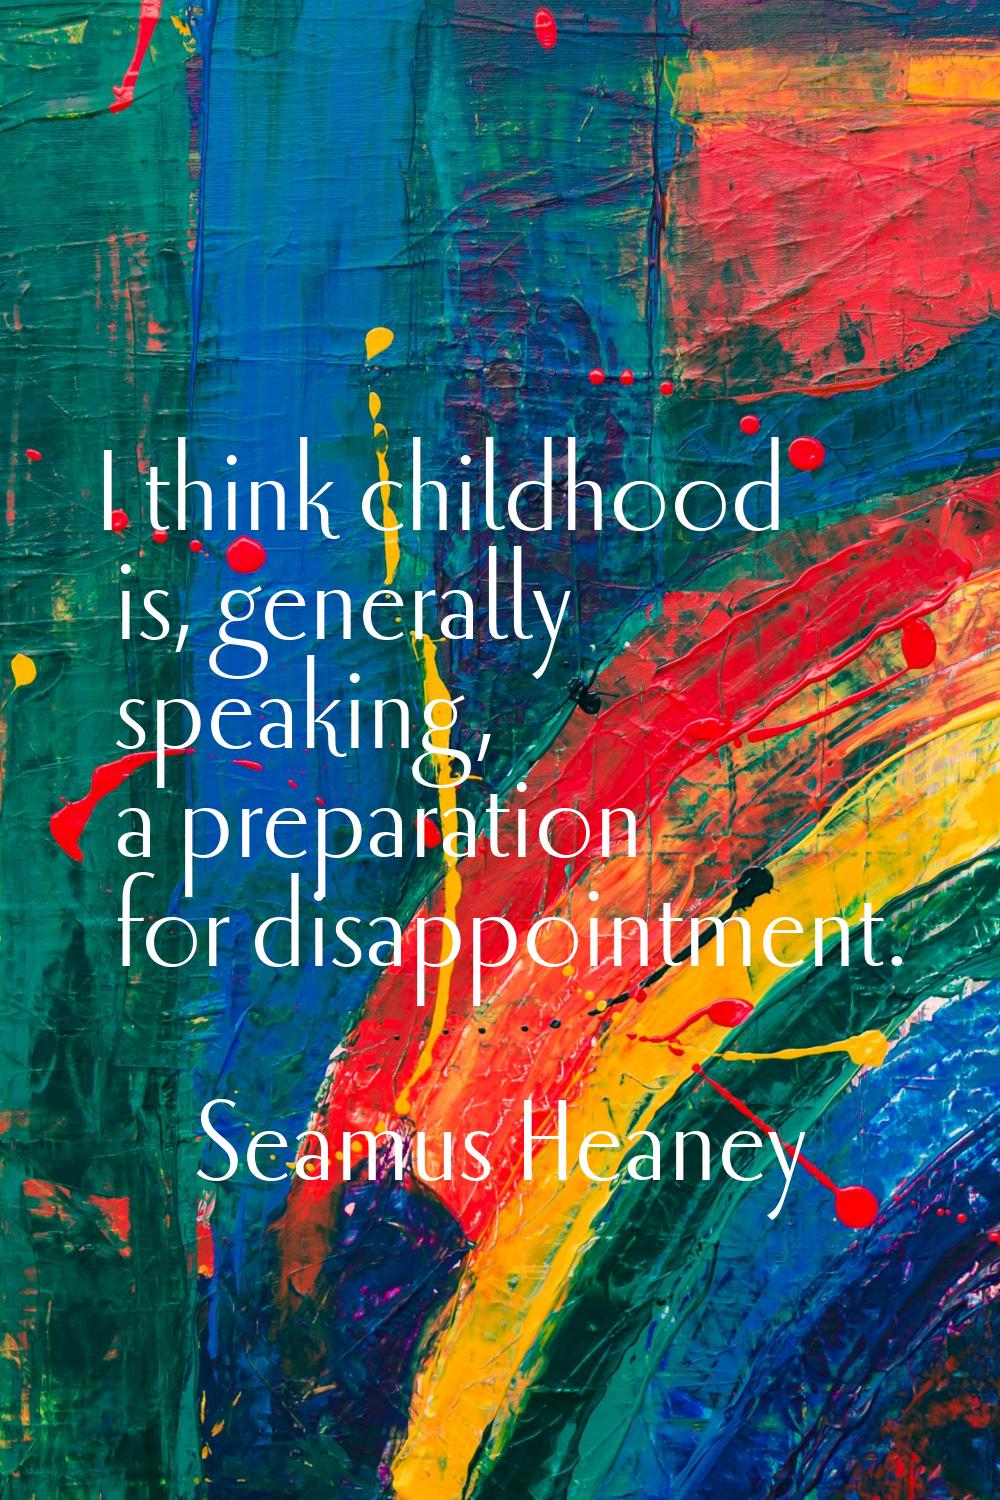 I think childhood is, generally speaking, a preparation for disappointment.